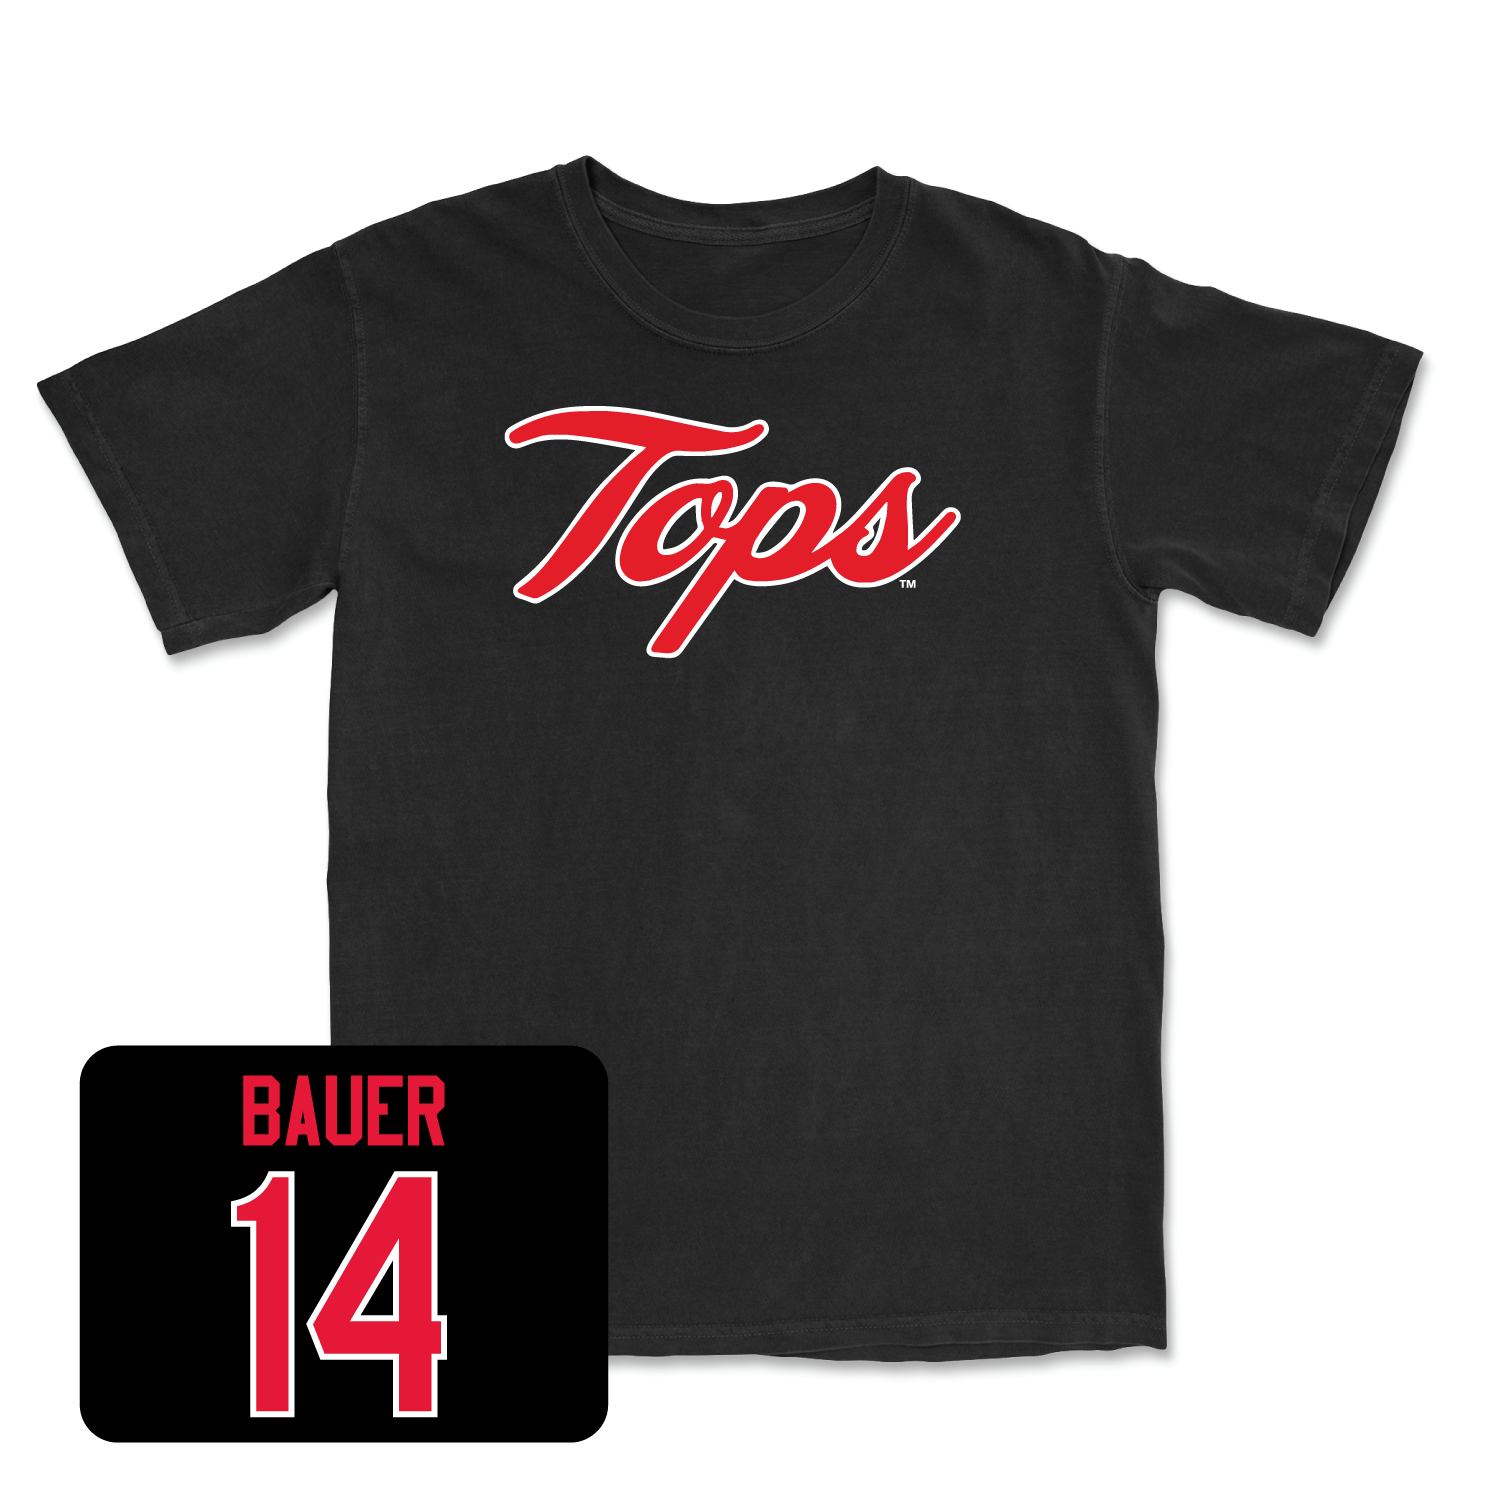 Black Women's Volleyball Tops Tee 4X-Large / Callie Bauer | #14